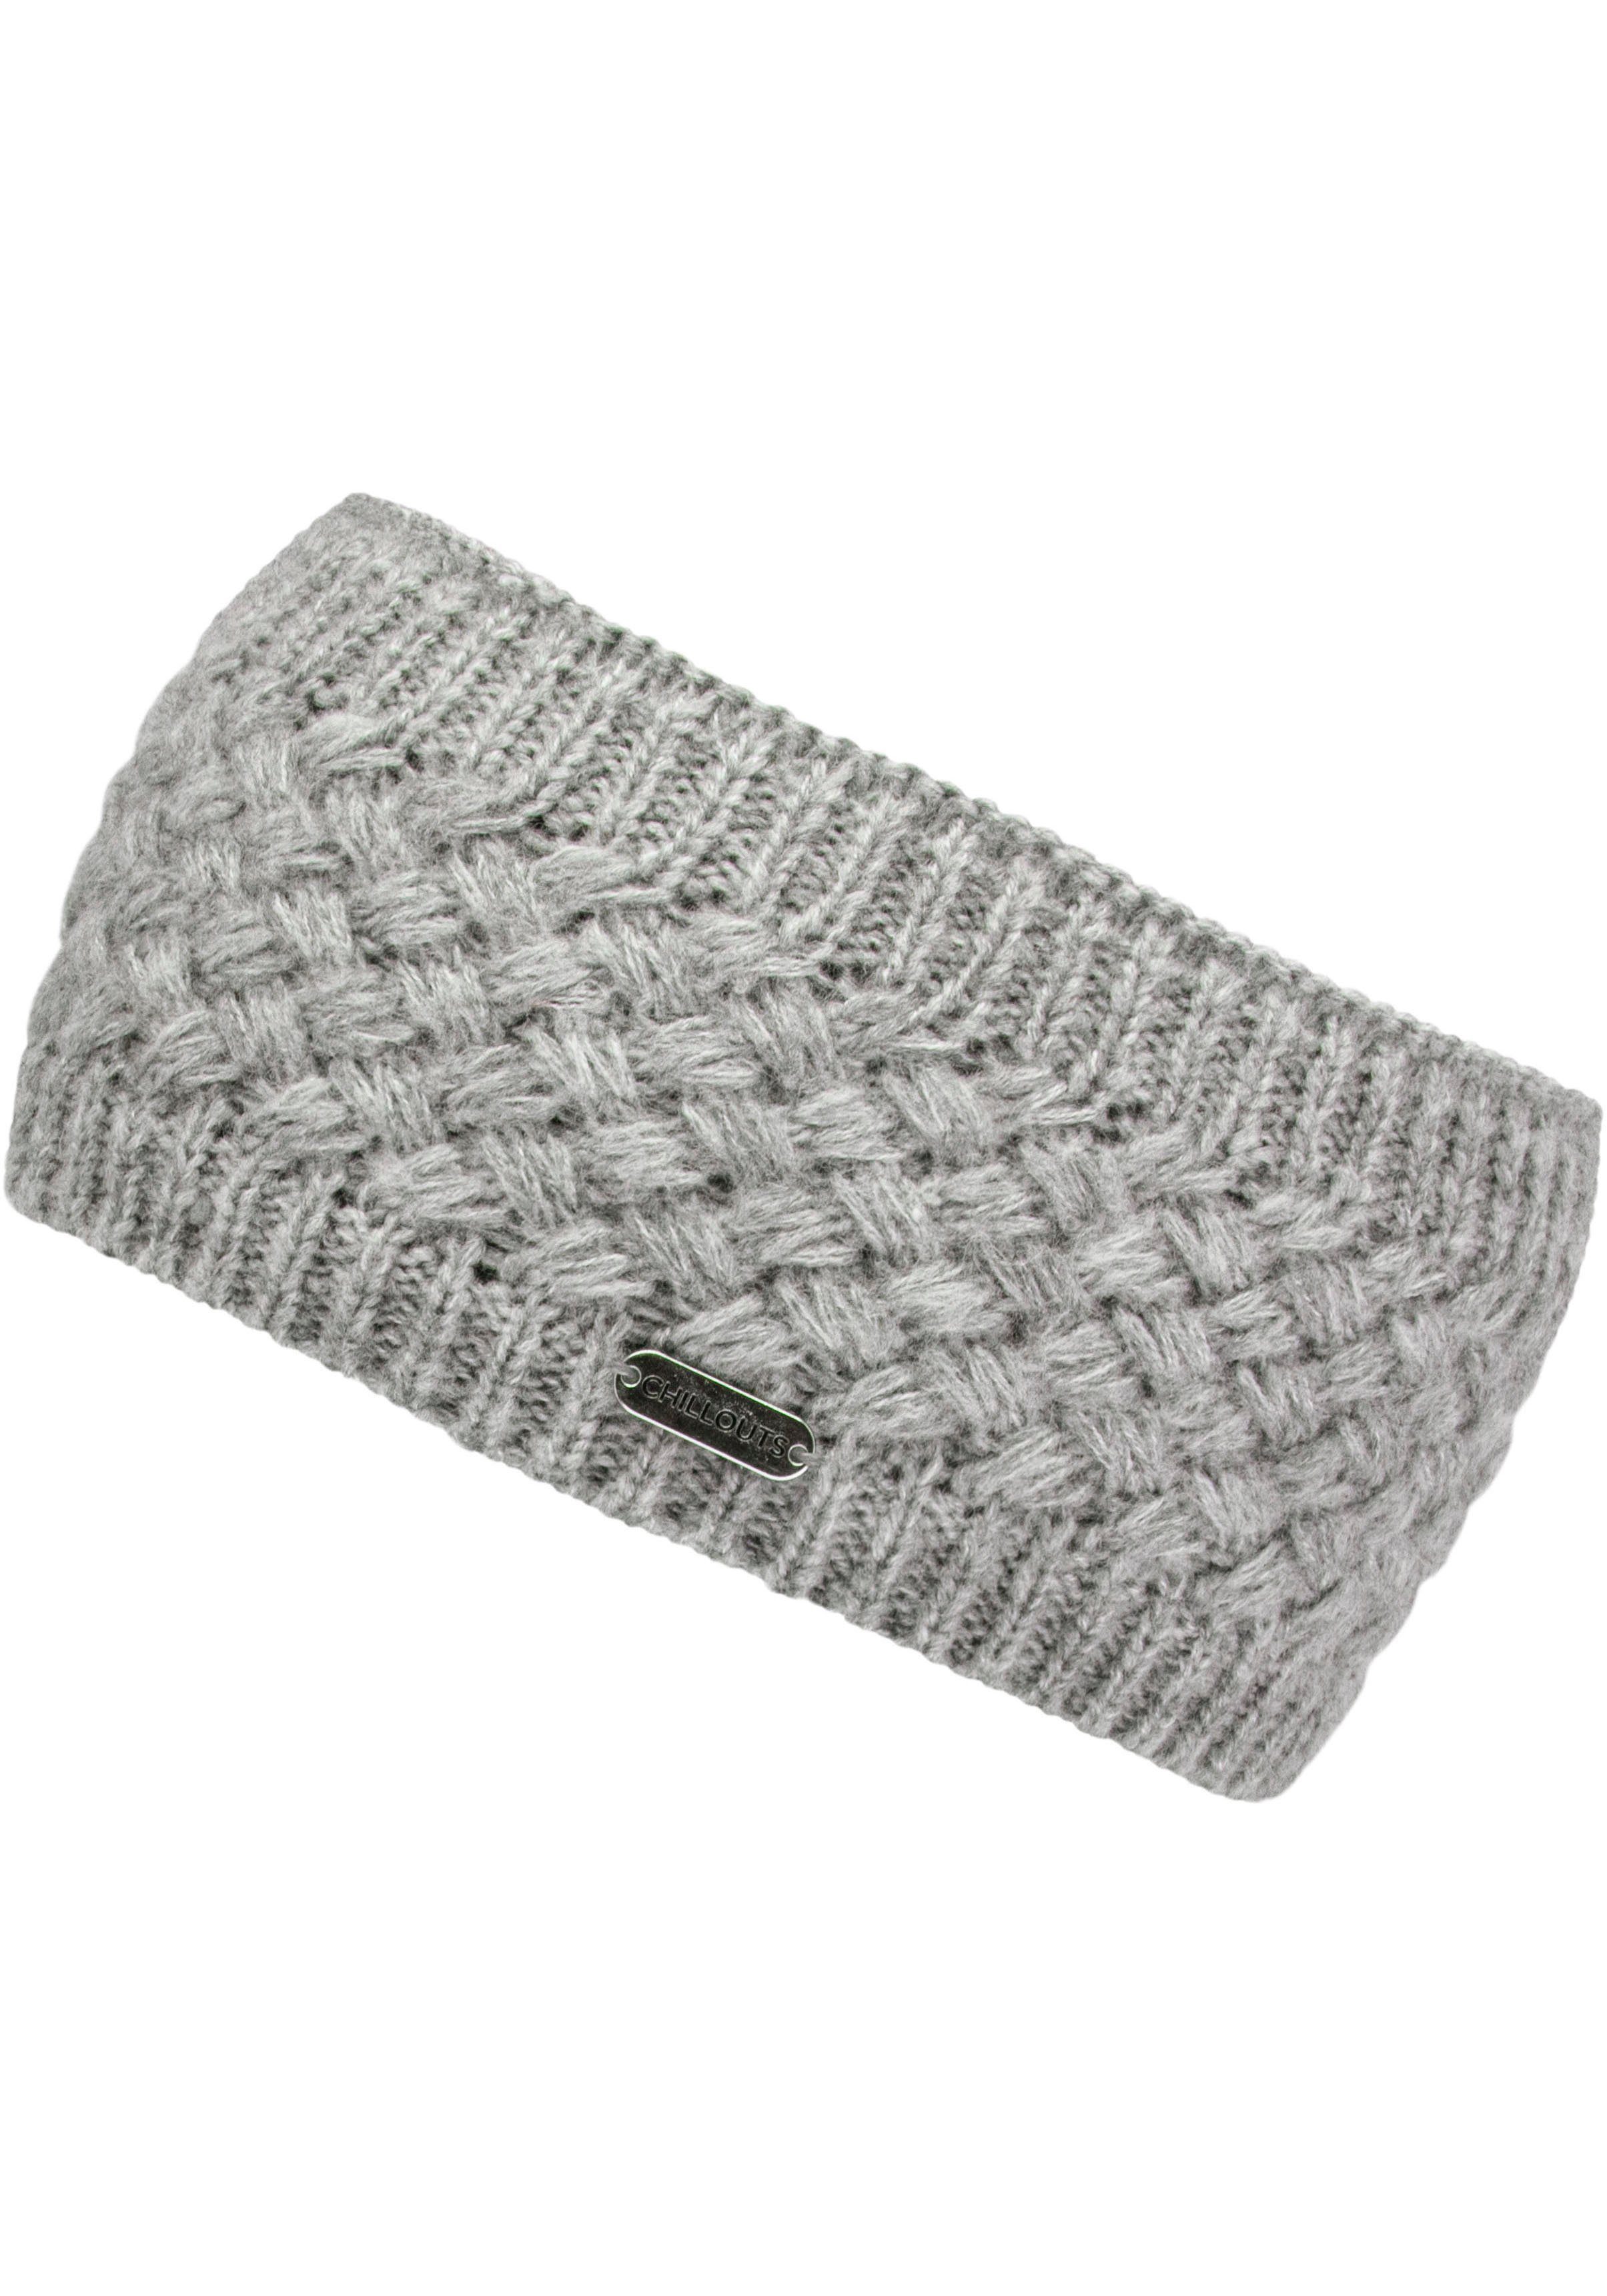 chillouts Stirnband Felicitas Headband Metall-Label